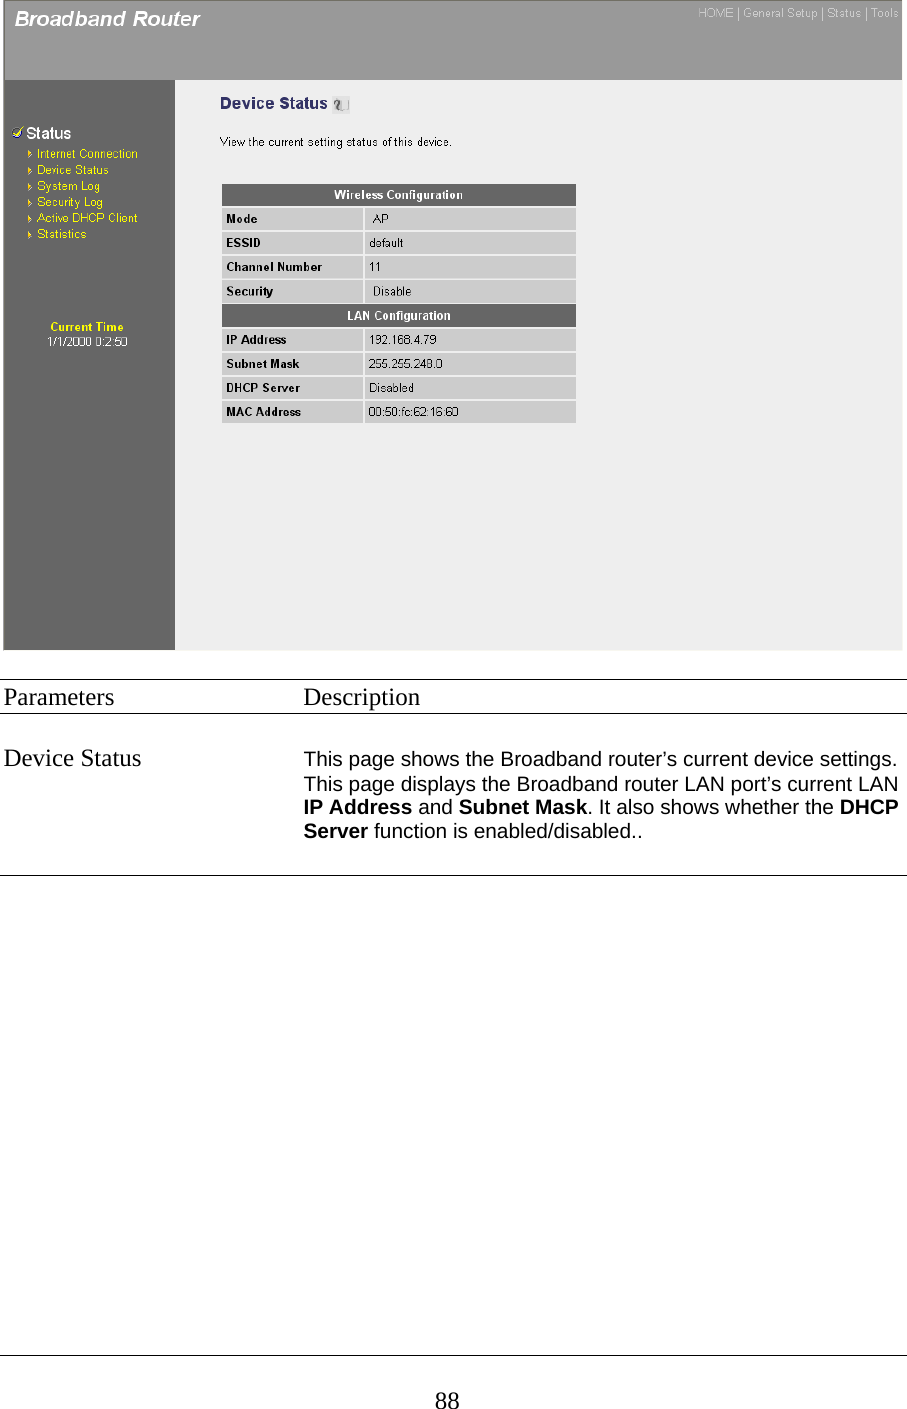   Parameters   Description  Device Status  This page shows the Broadband router’s current device settings. This page displays the Broadband router LAN port’s current LAN IP Address and Subnet Mask. It also shows whether the DHCP Server function is enabled/disabled..                   88